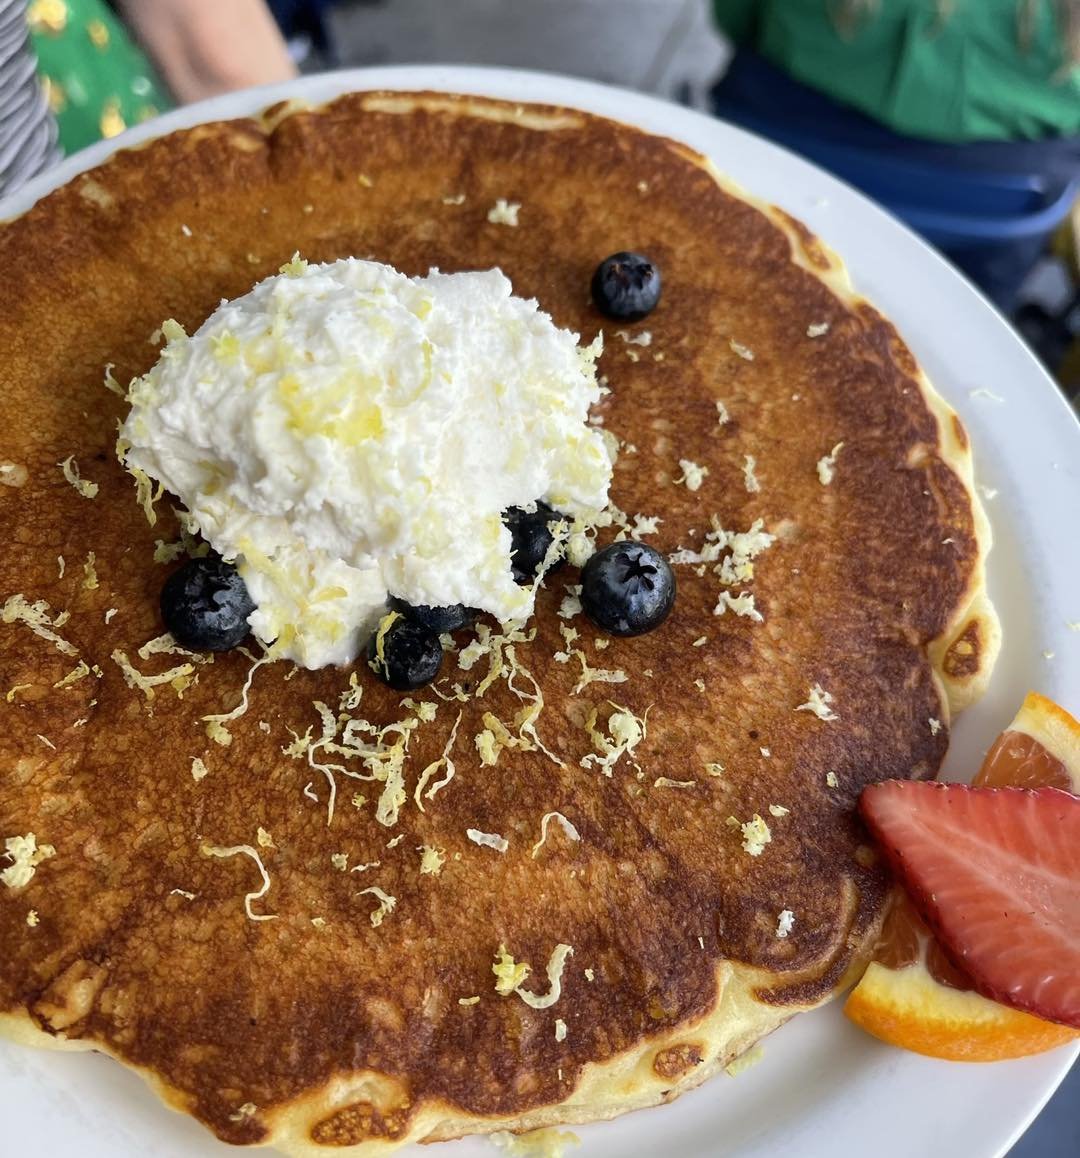 Happy Earth Day! 

Today&rsquo;s Blueberry Lemon Pancakes are looking sooo Good!